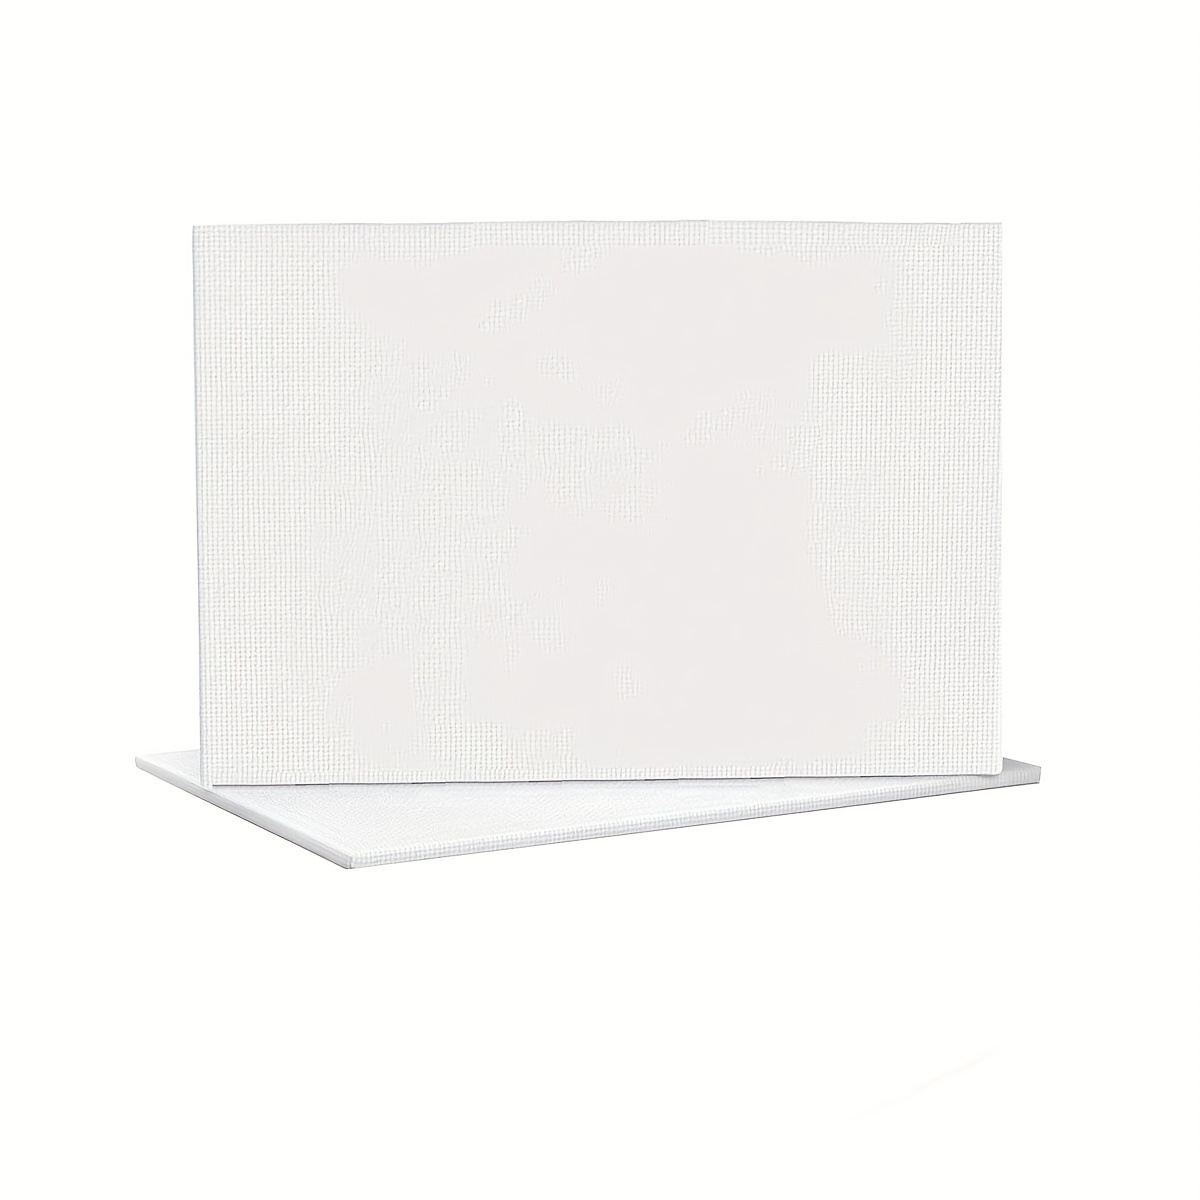  20 Pack Canvases for Painting with 8x10, Painting Canvas for  Oil & Acrylic Paint.